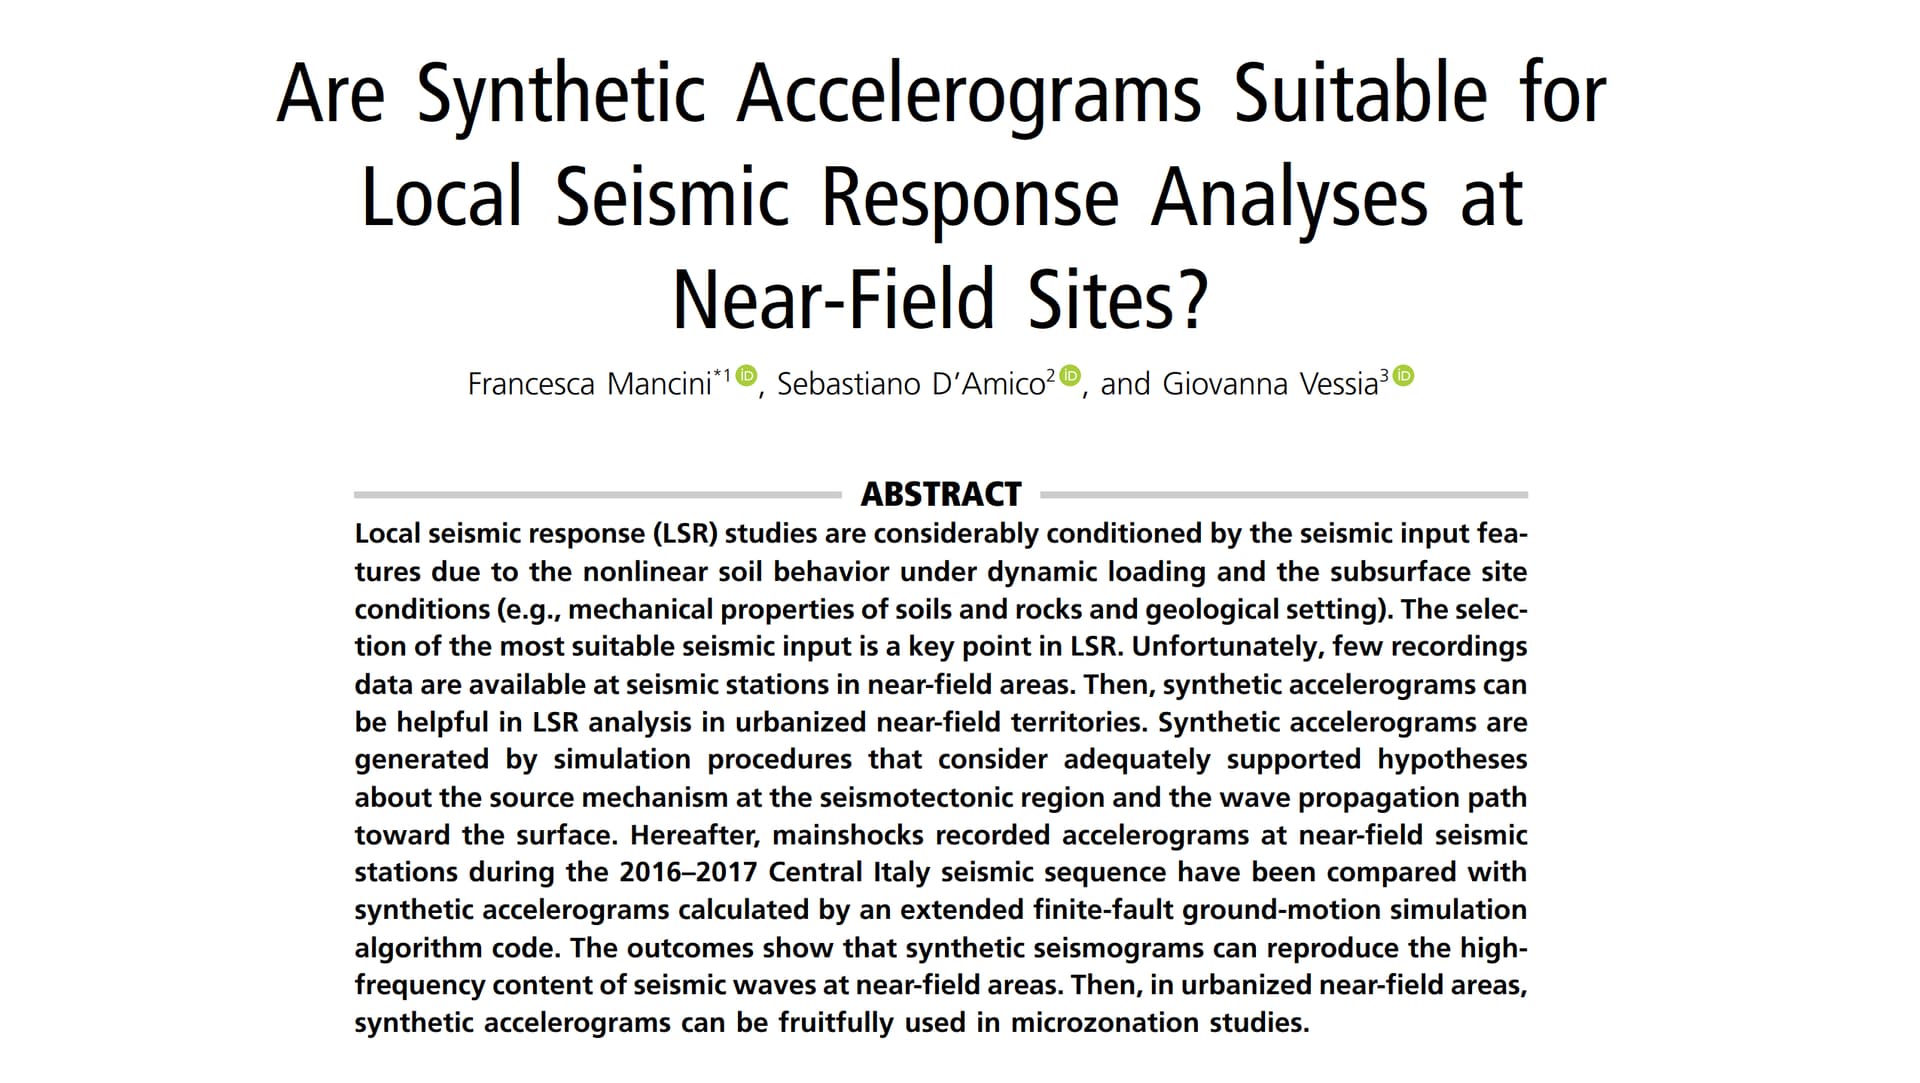 Are Synthetic Accelerograms Suitable for Local Seismic Response Analyses at Near‐Field Sites?